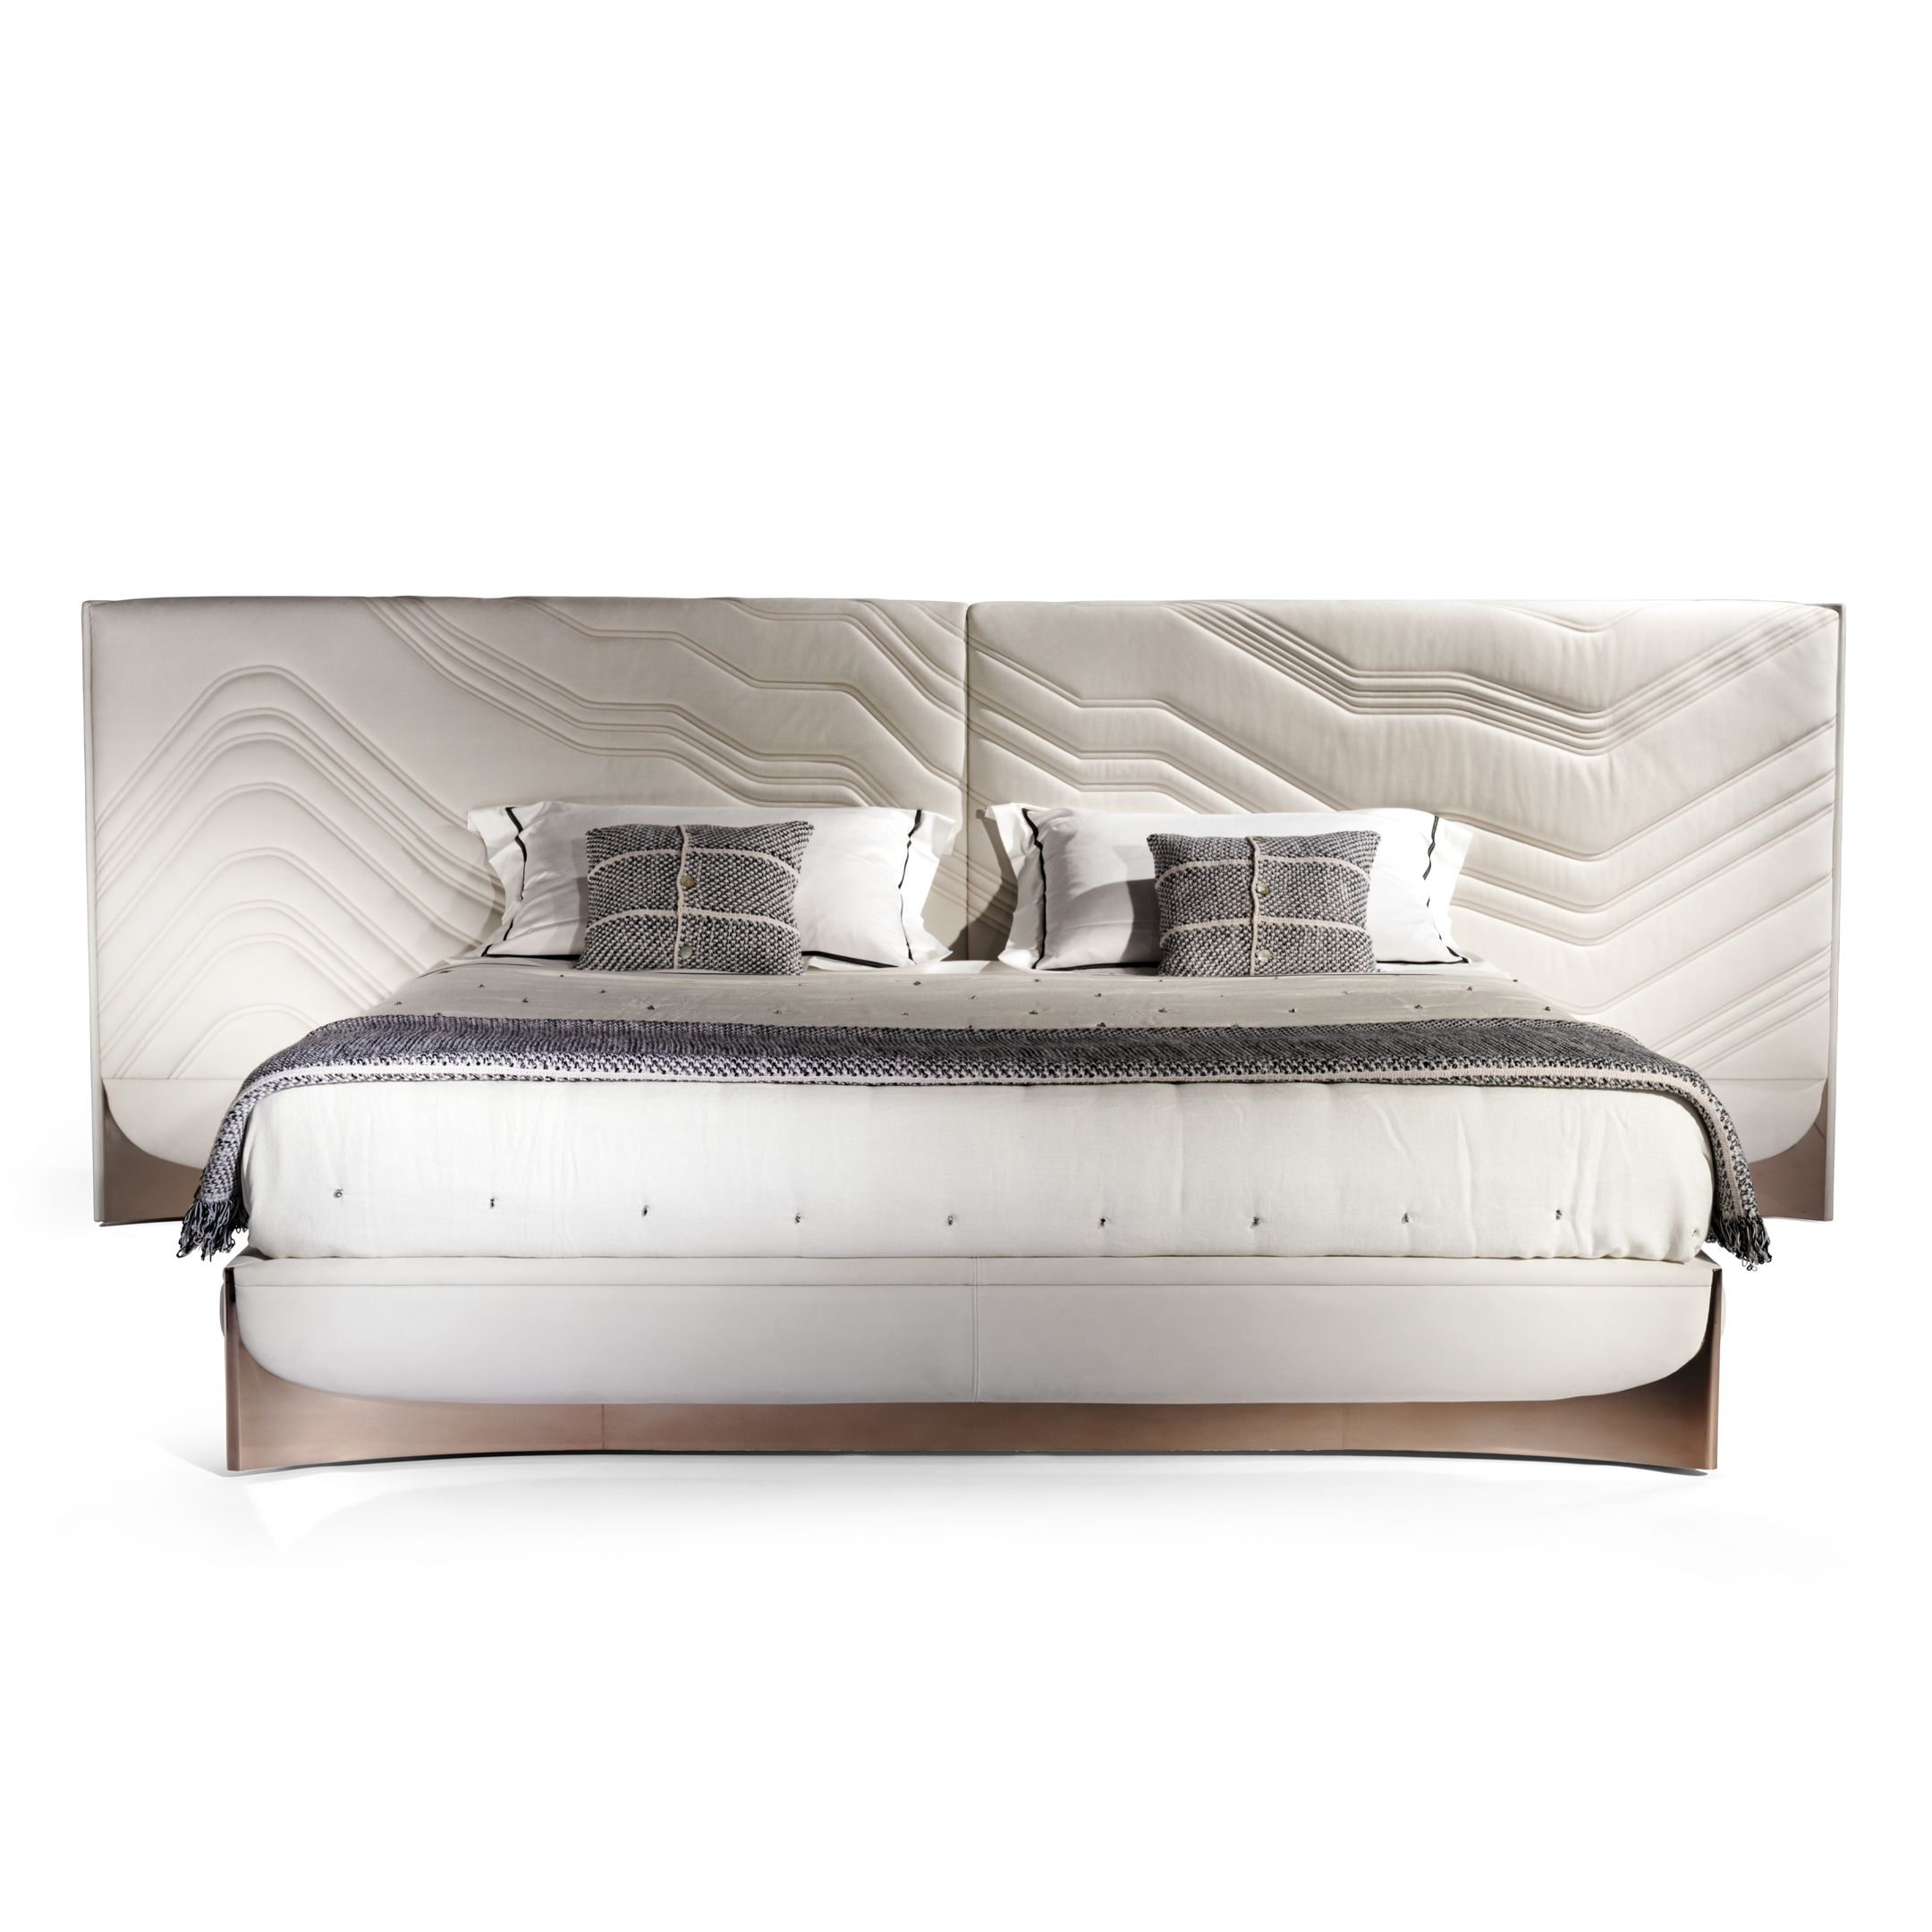 visionnaire bed